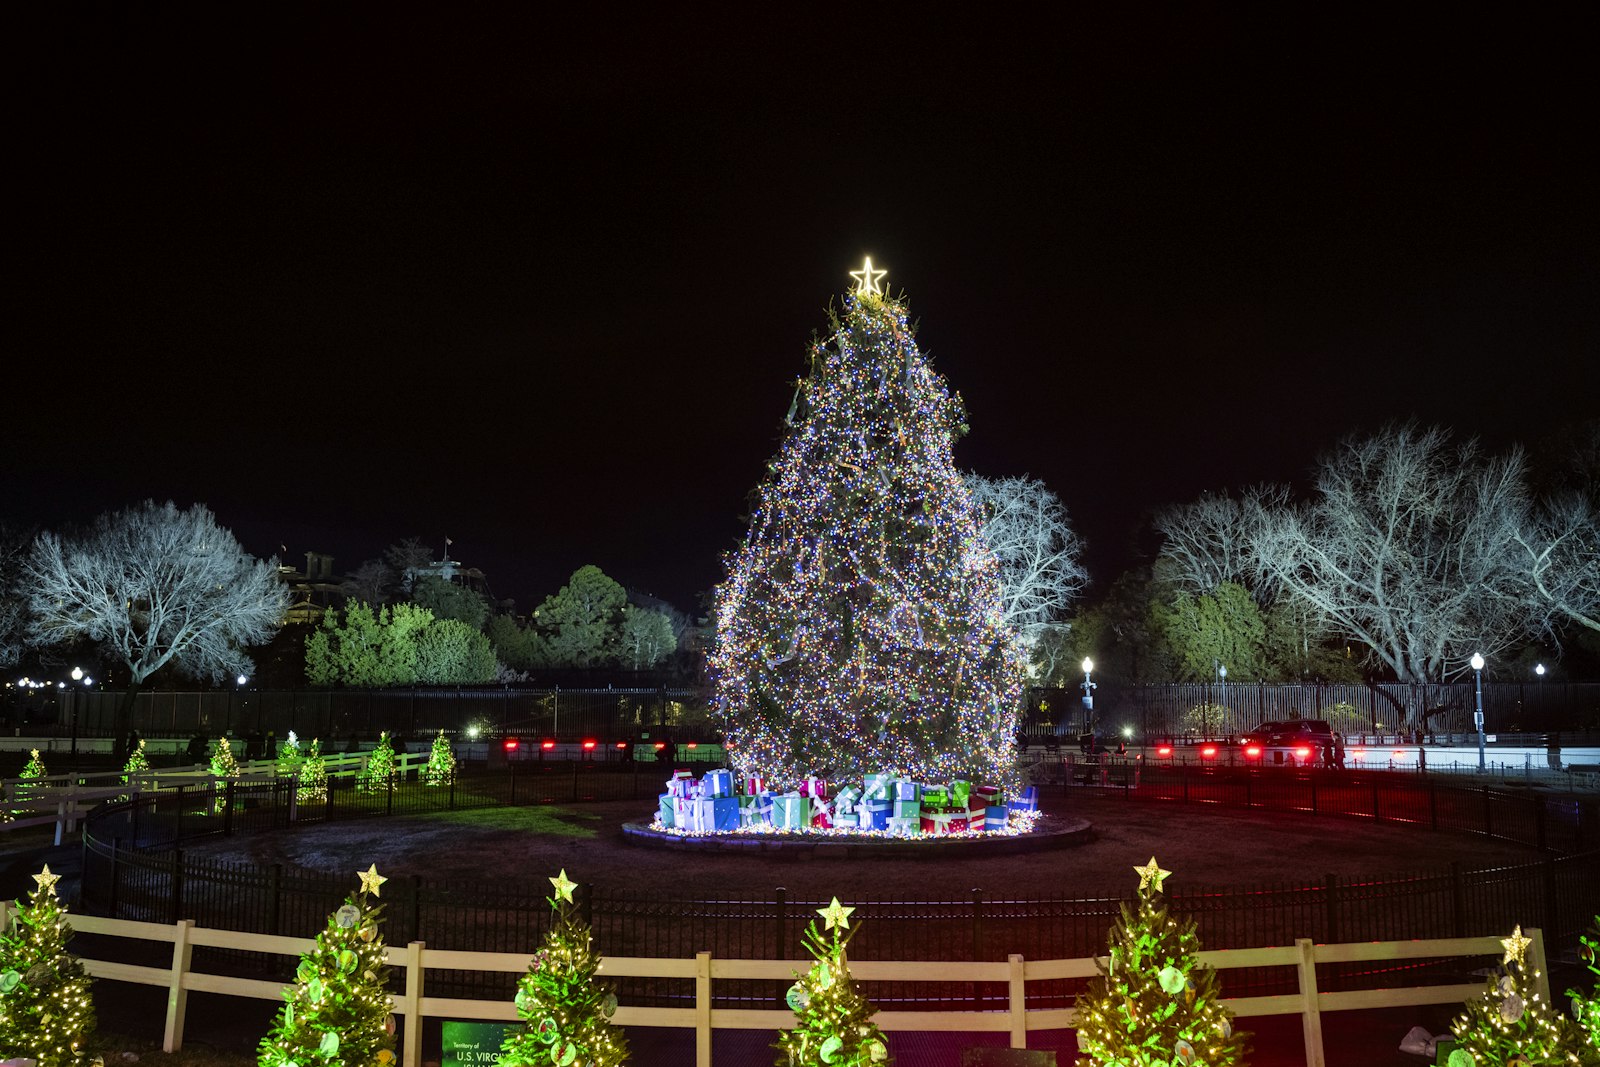 A large evergreen tree decorated with strands of lights and topped with a gold star, at night.